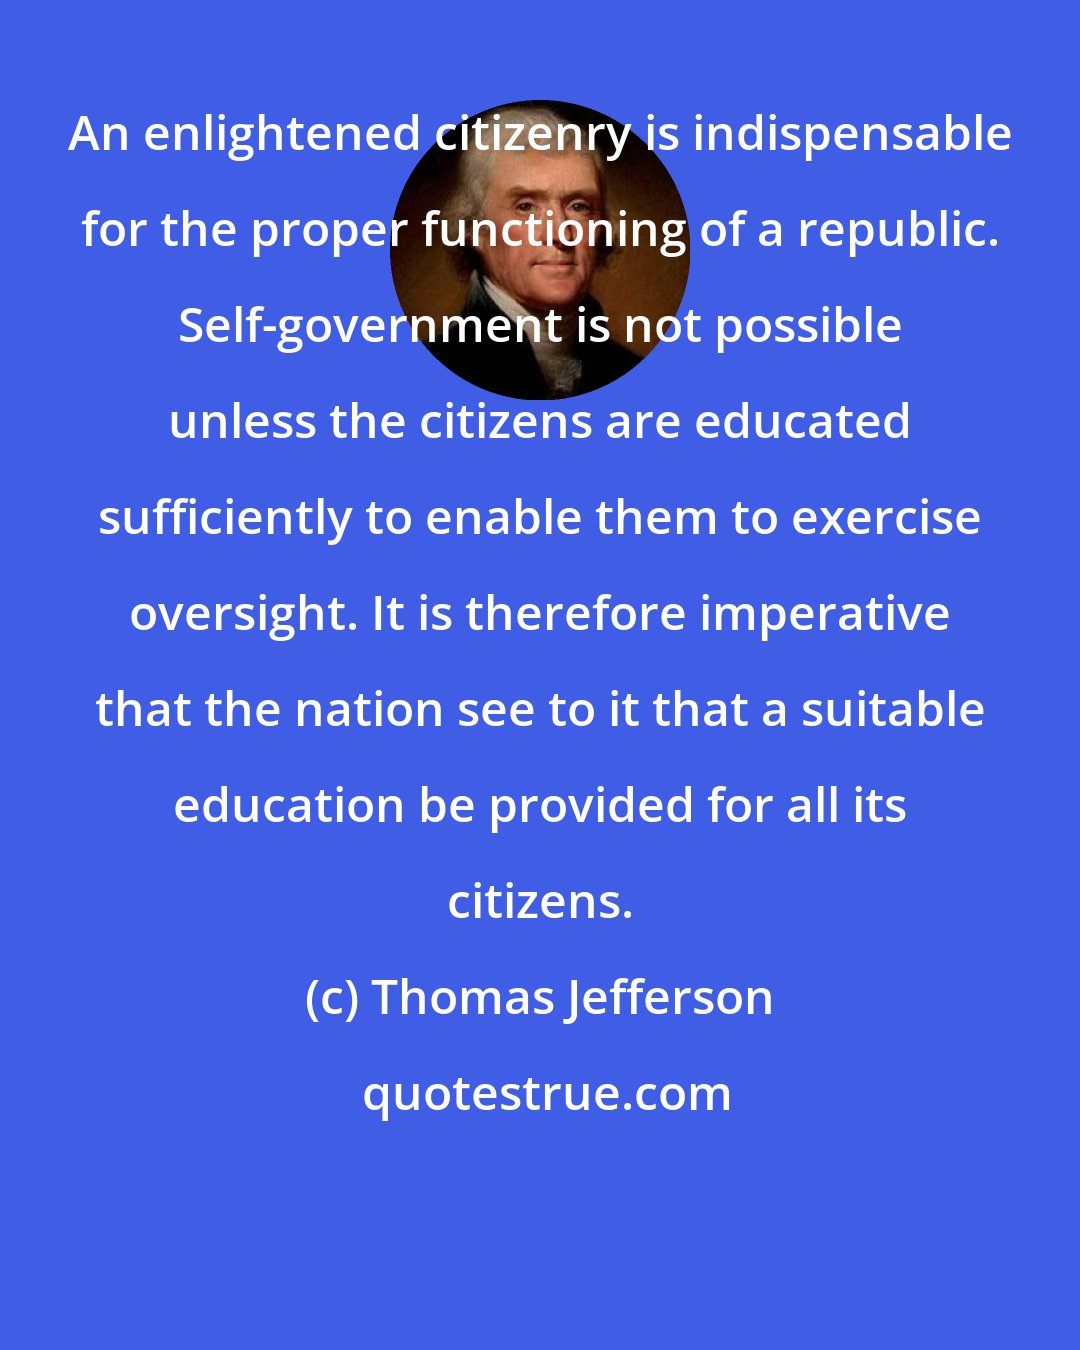 Thomas Jefferson: An enlightened citizenry is indispensable for the proper functioning of a republic. Self-government is not possible unless the citizens are educated sufficiently to enable them to exercise oversight. It is therefore imperative that the nation see to it that a suitable education be provided for all its citizens.